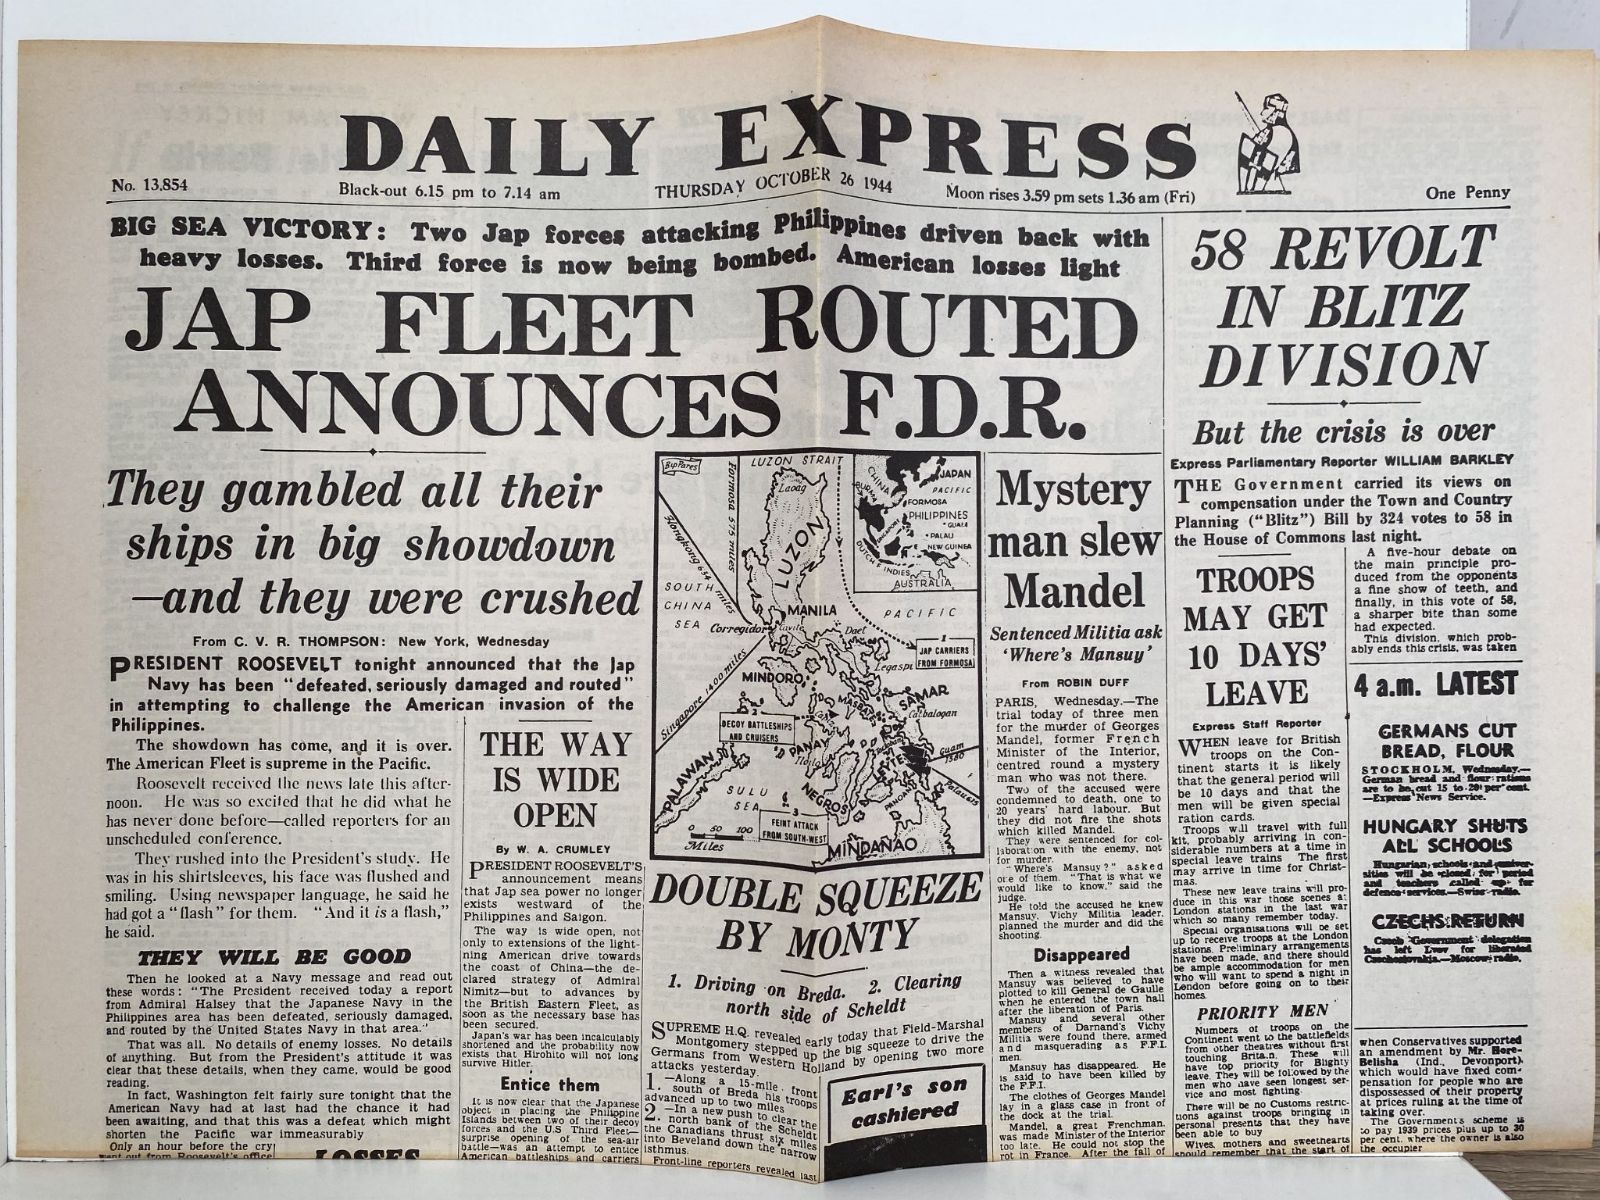 OLD WARTIME NEWSPAPER: Daily Express, Thursday 26 October 1944